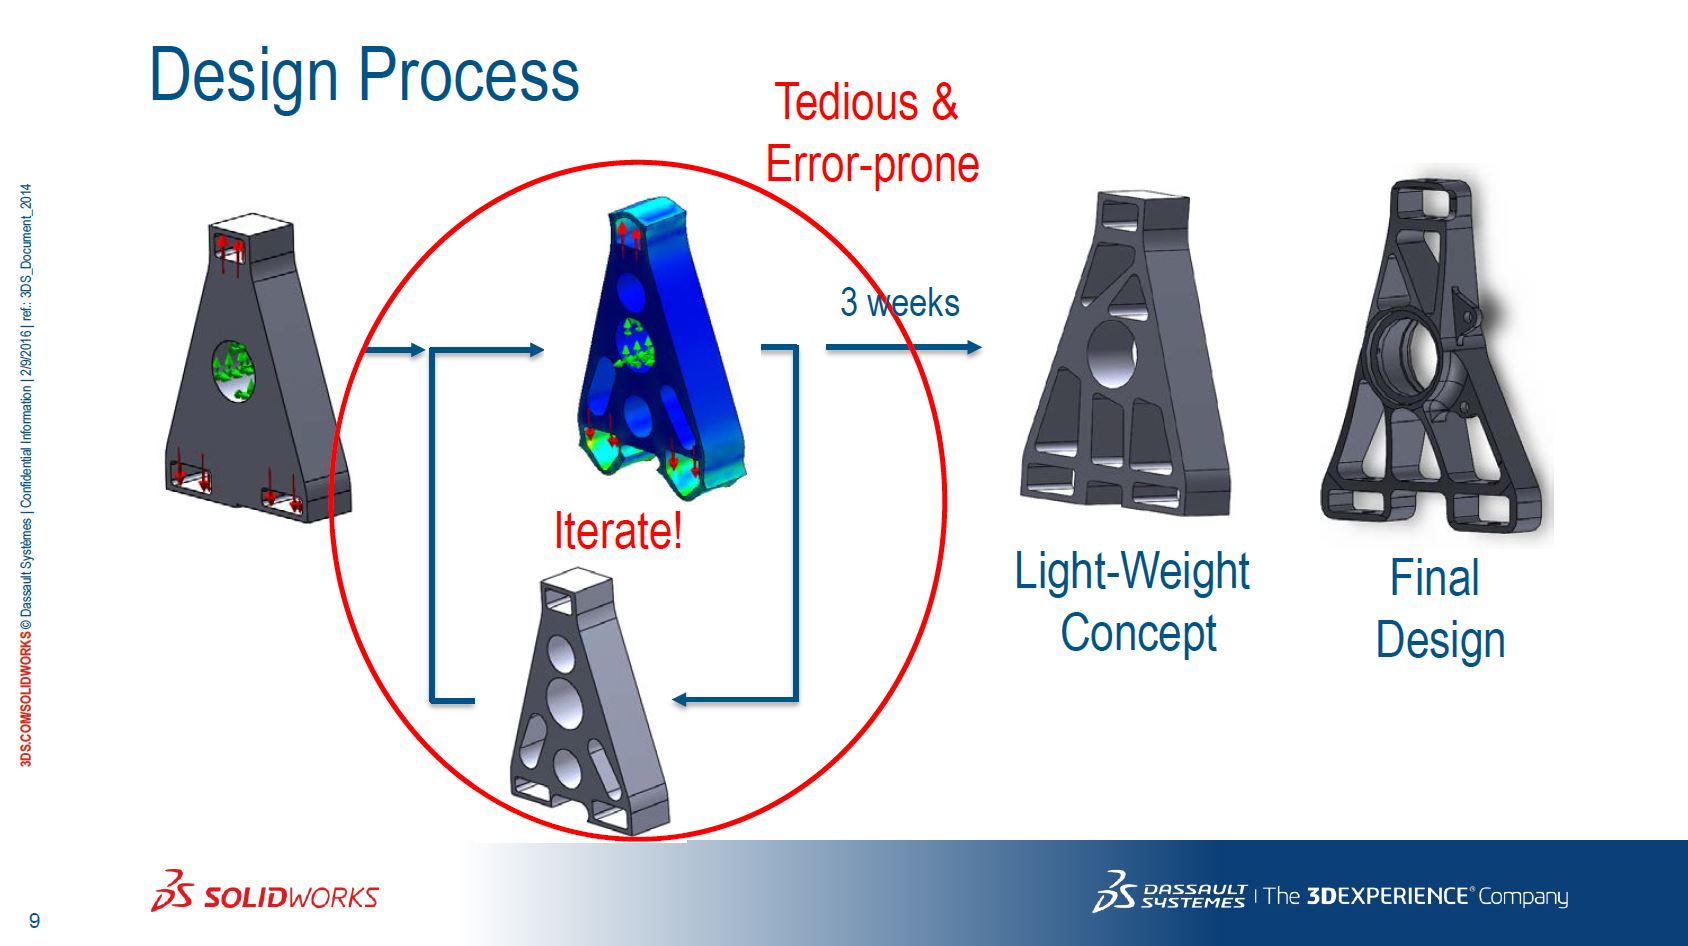 ParetoWorks can automate the lightweighting optimization of a part based on stiffness and strength. (All images courtesy of SOLIDWORKS and SciArt.)